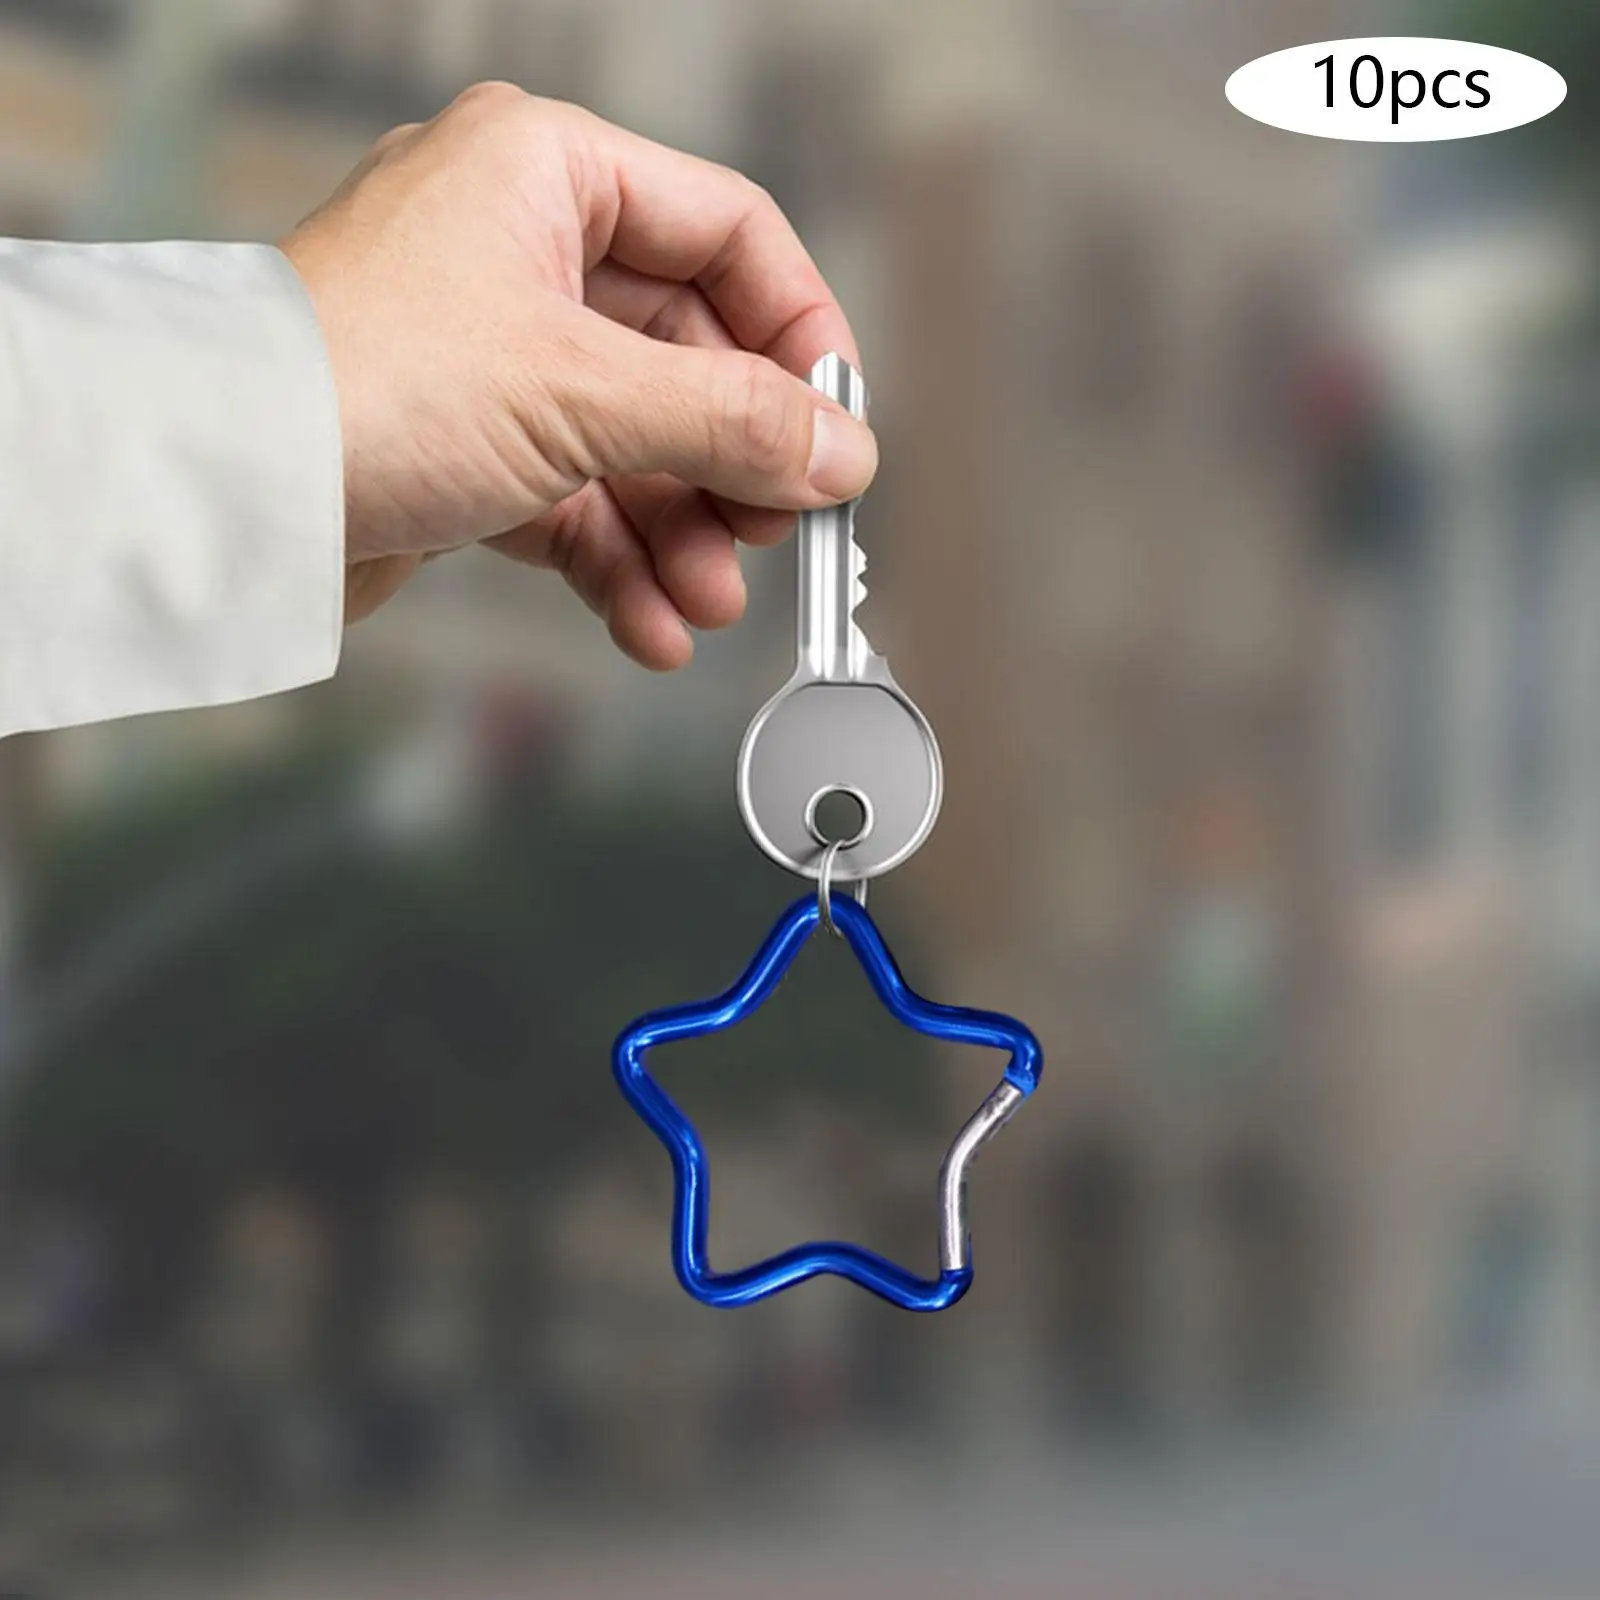 10Pcs Five Pointed Star Shaped Carabiner Key Chain Clip Quick Release Heavy Duty for Backpacks Traveling Hiking Keychains Home